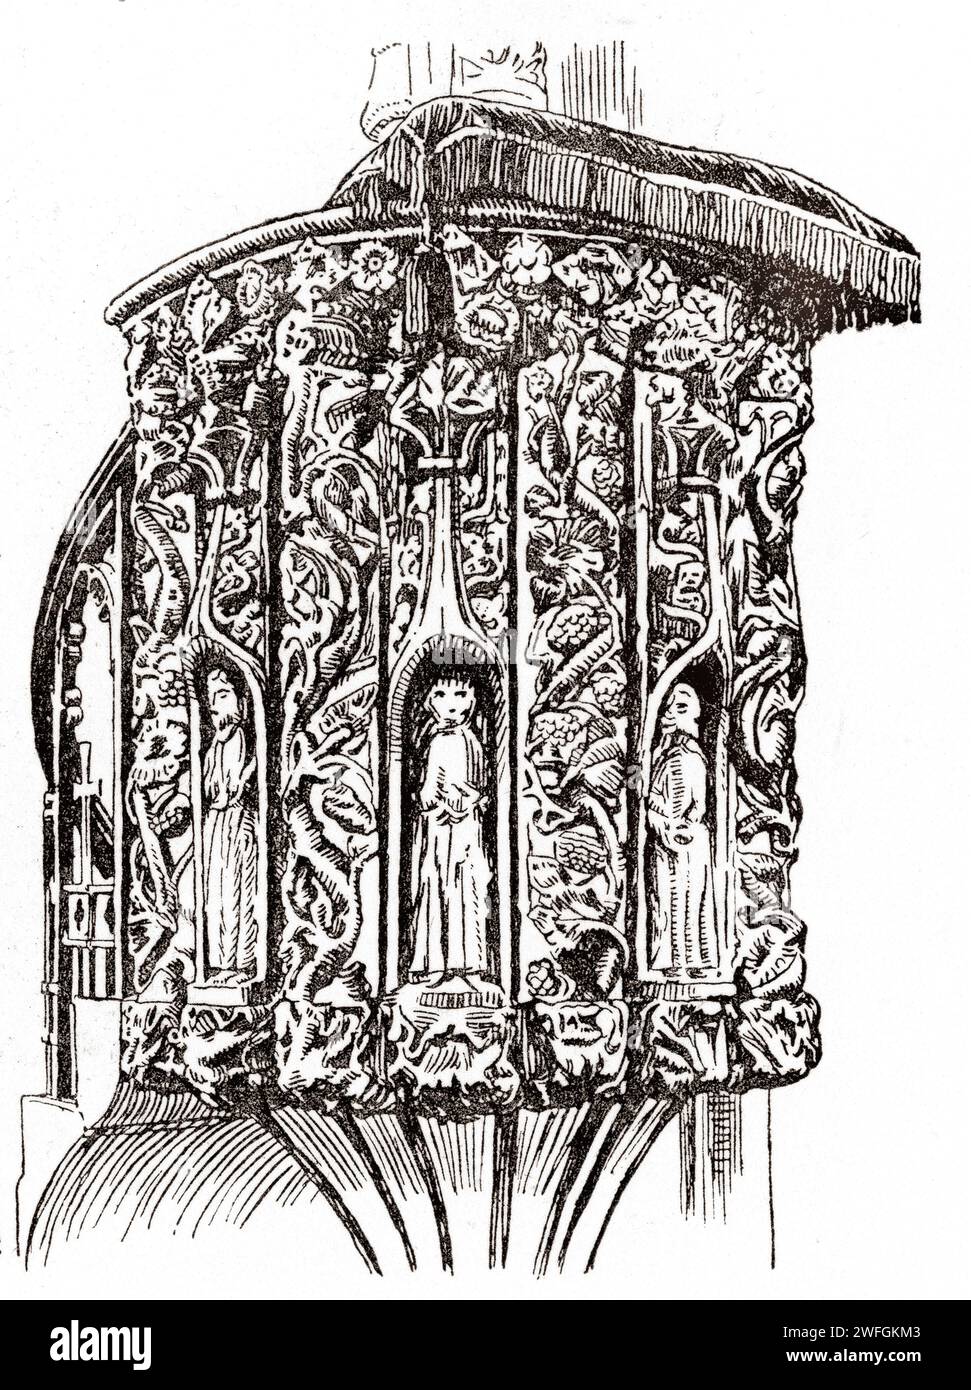 Pen and ink sketch - Dittisham, South Hams District, Devon - St George's church pulpit, the carved and painted stone pulpit dates from the 15th Century. Illustration from the book Glorious Devon  by S.P.B. Mais, published by London Great Western Railway Company, 1928 Stock Photo